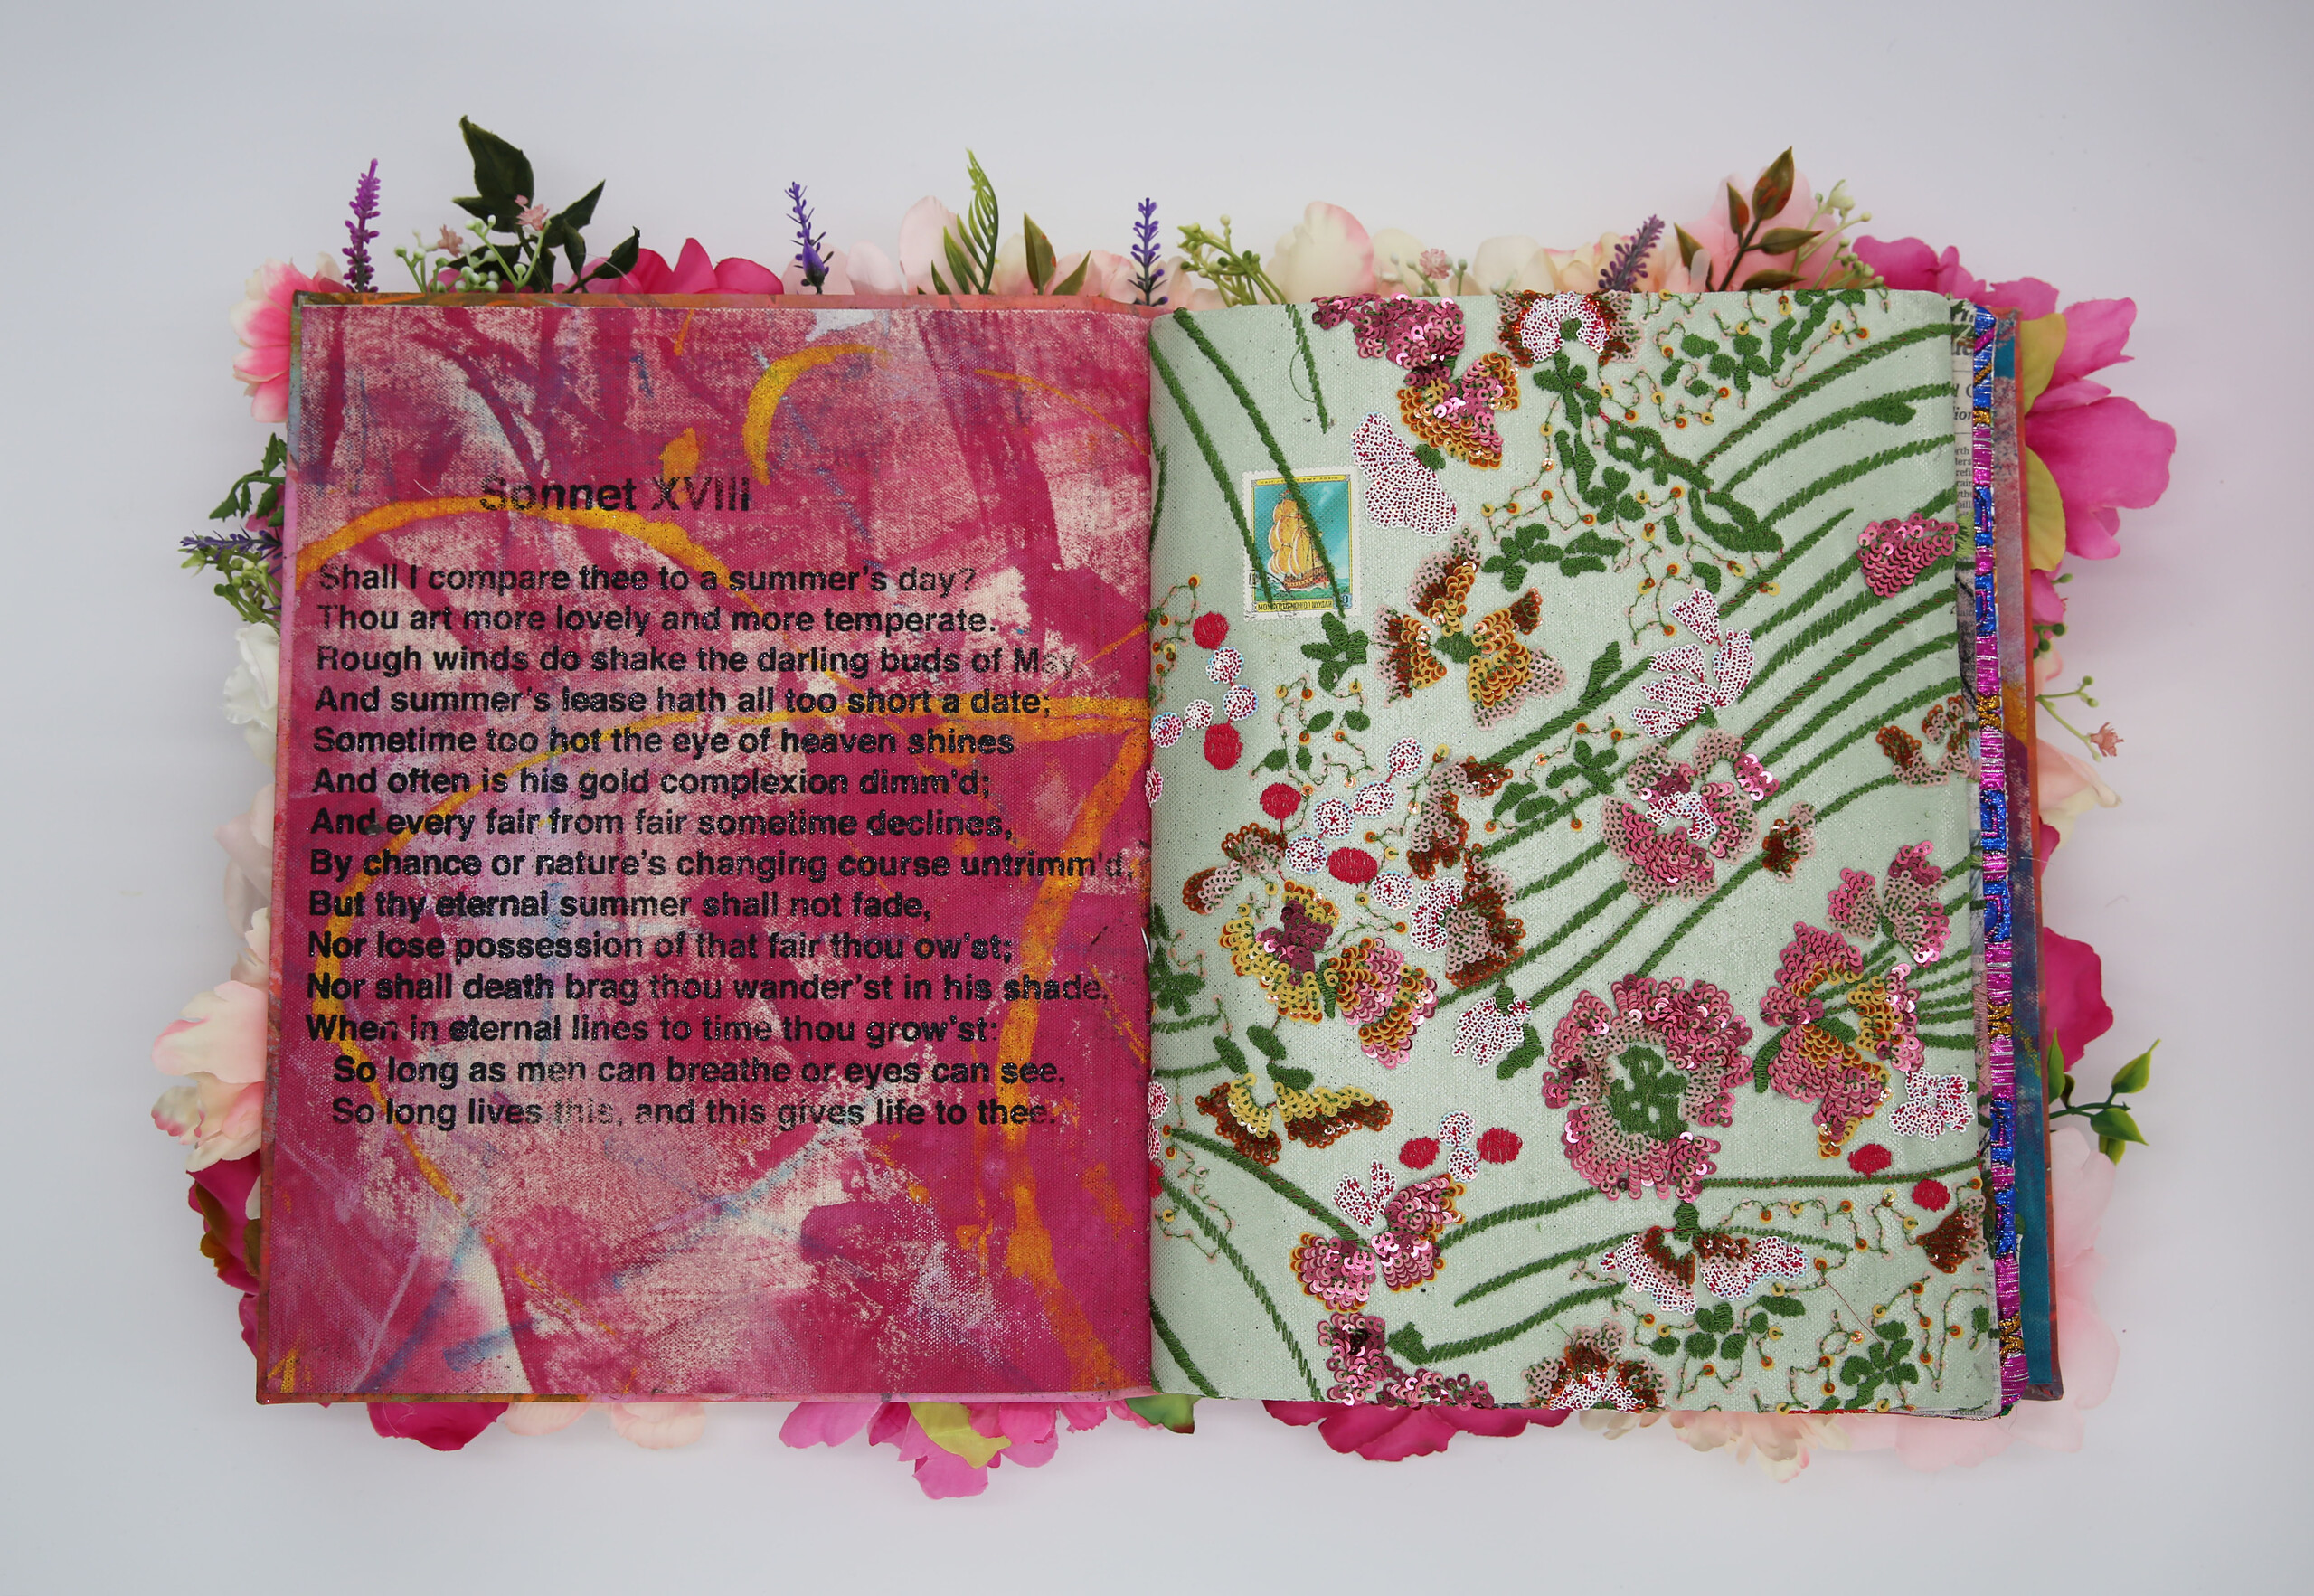 A photo of an artist's book, open in the middle. The left page displays Shakespeare's Sonnet XVII, and is painted in pink and yellow streaks. The right page has embroidered and sequined flowers and leaves.